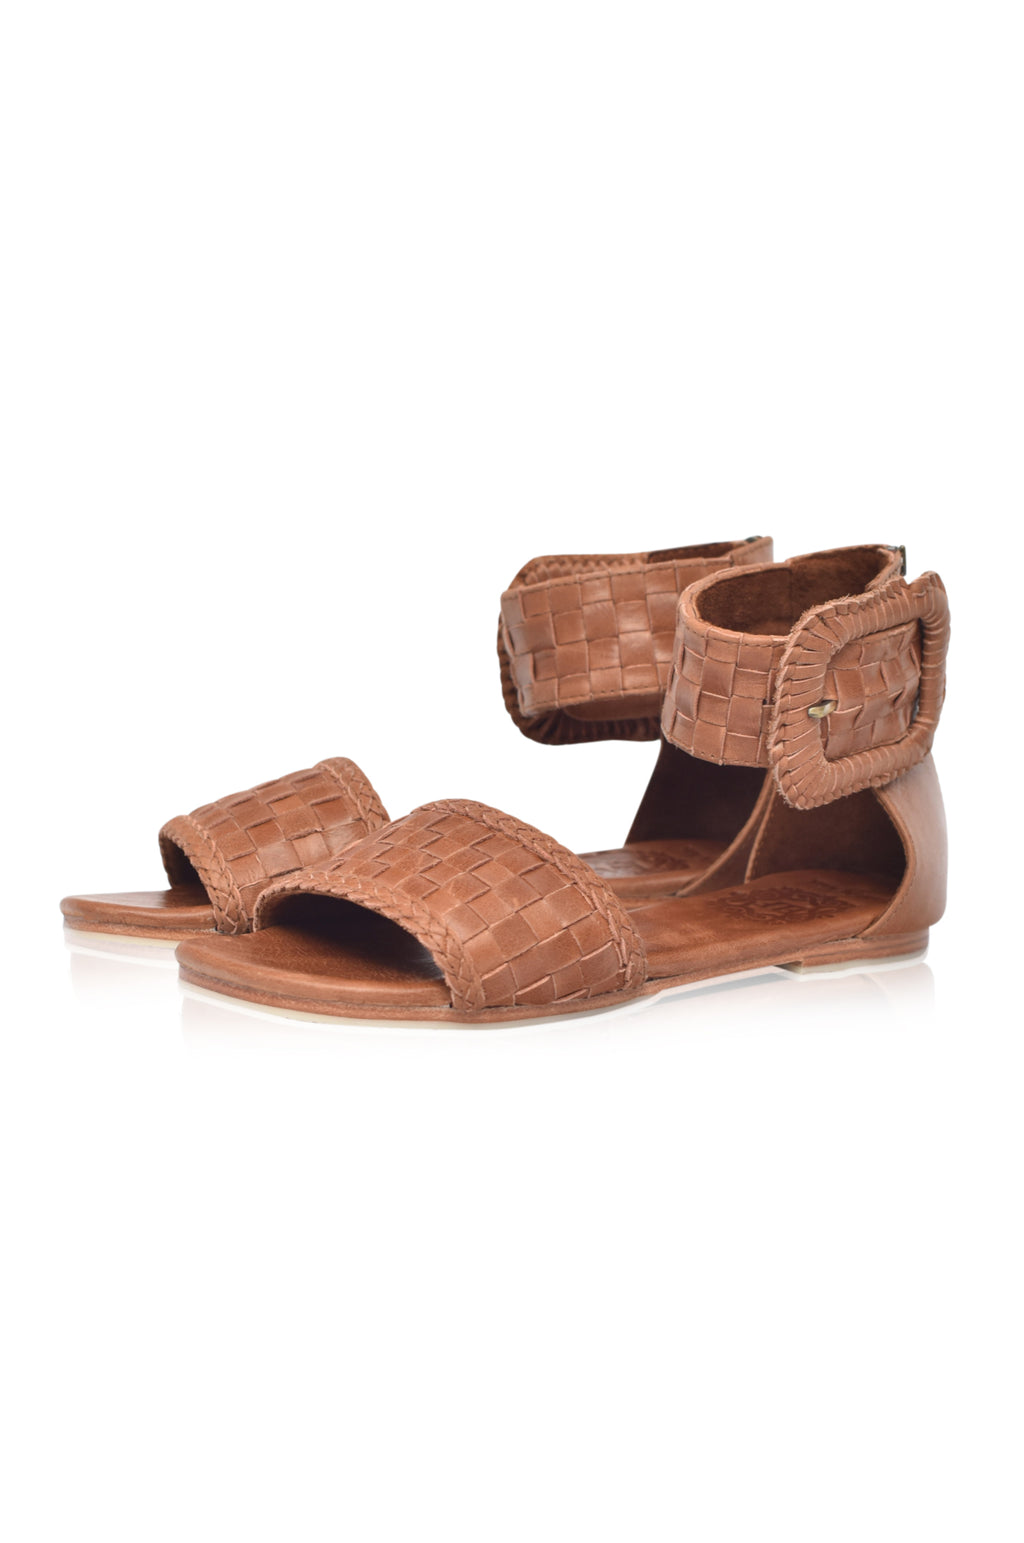 Leather Sandals - Buy Leather Sandals Online Starting at Just ₹204